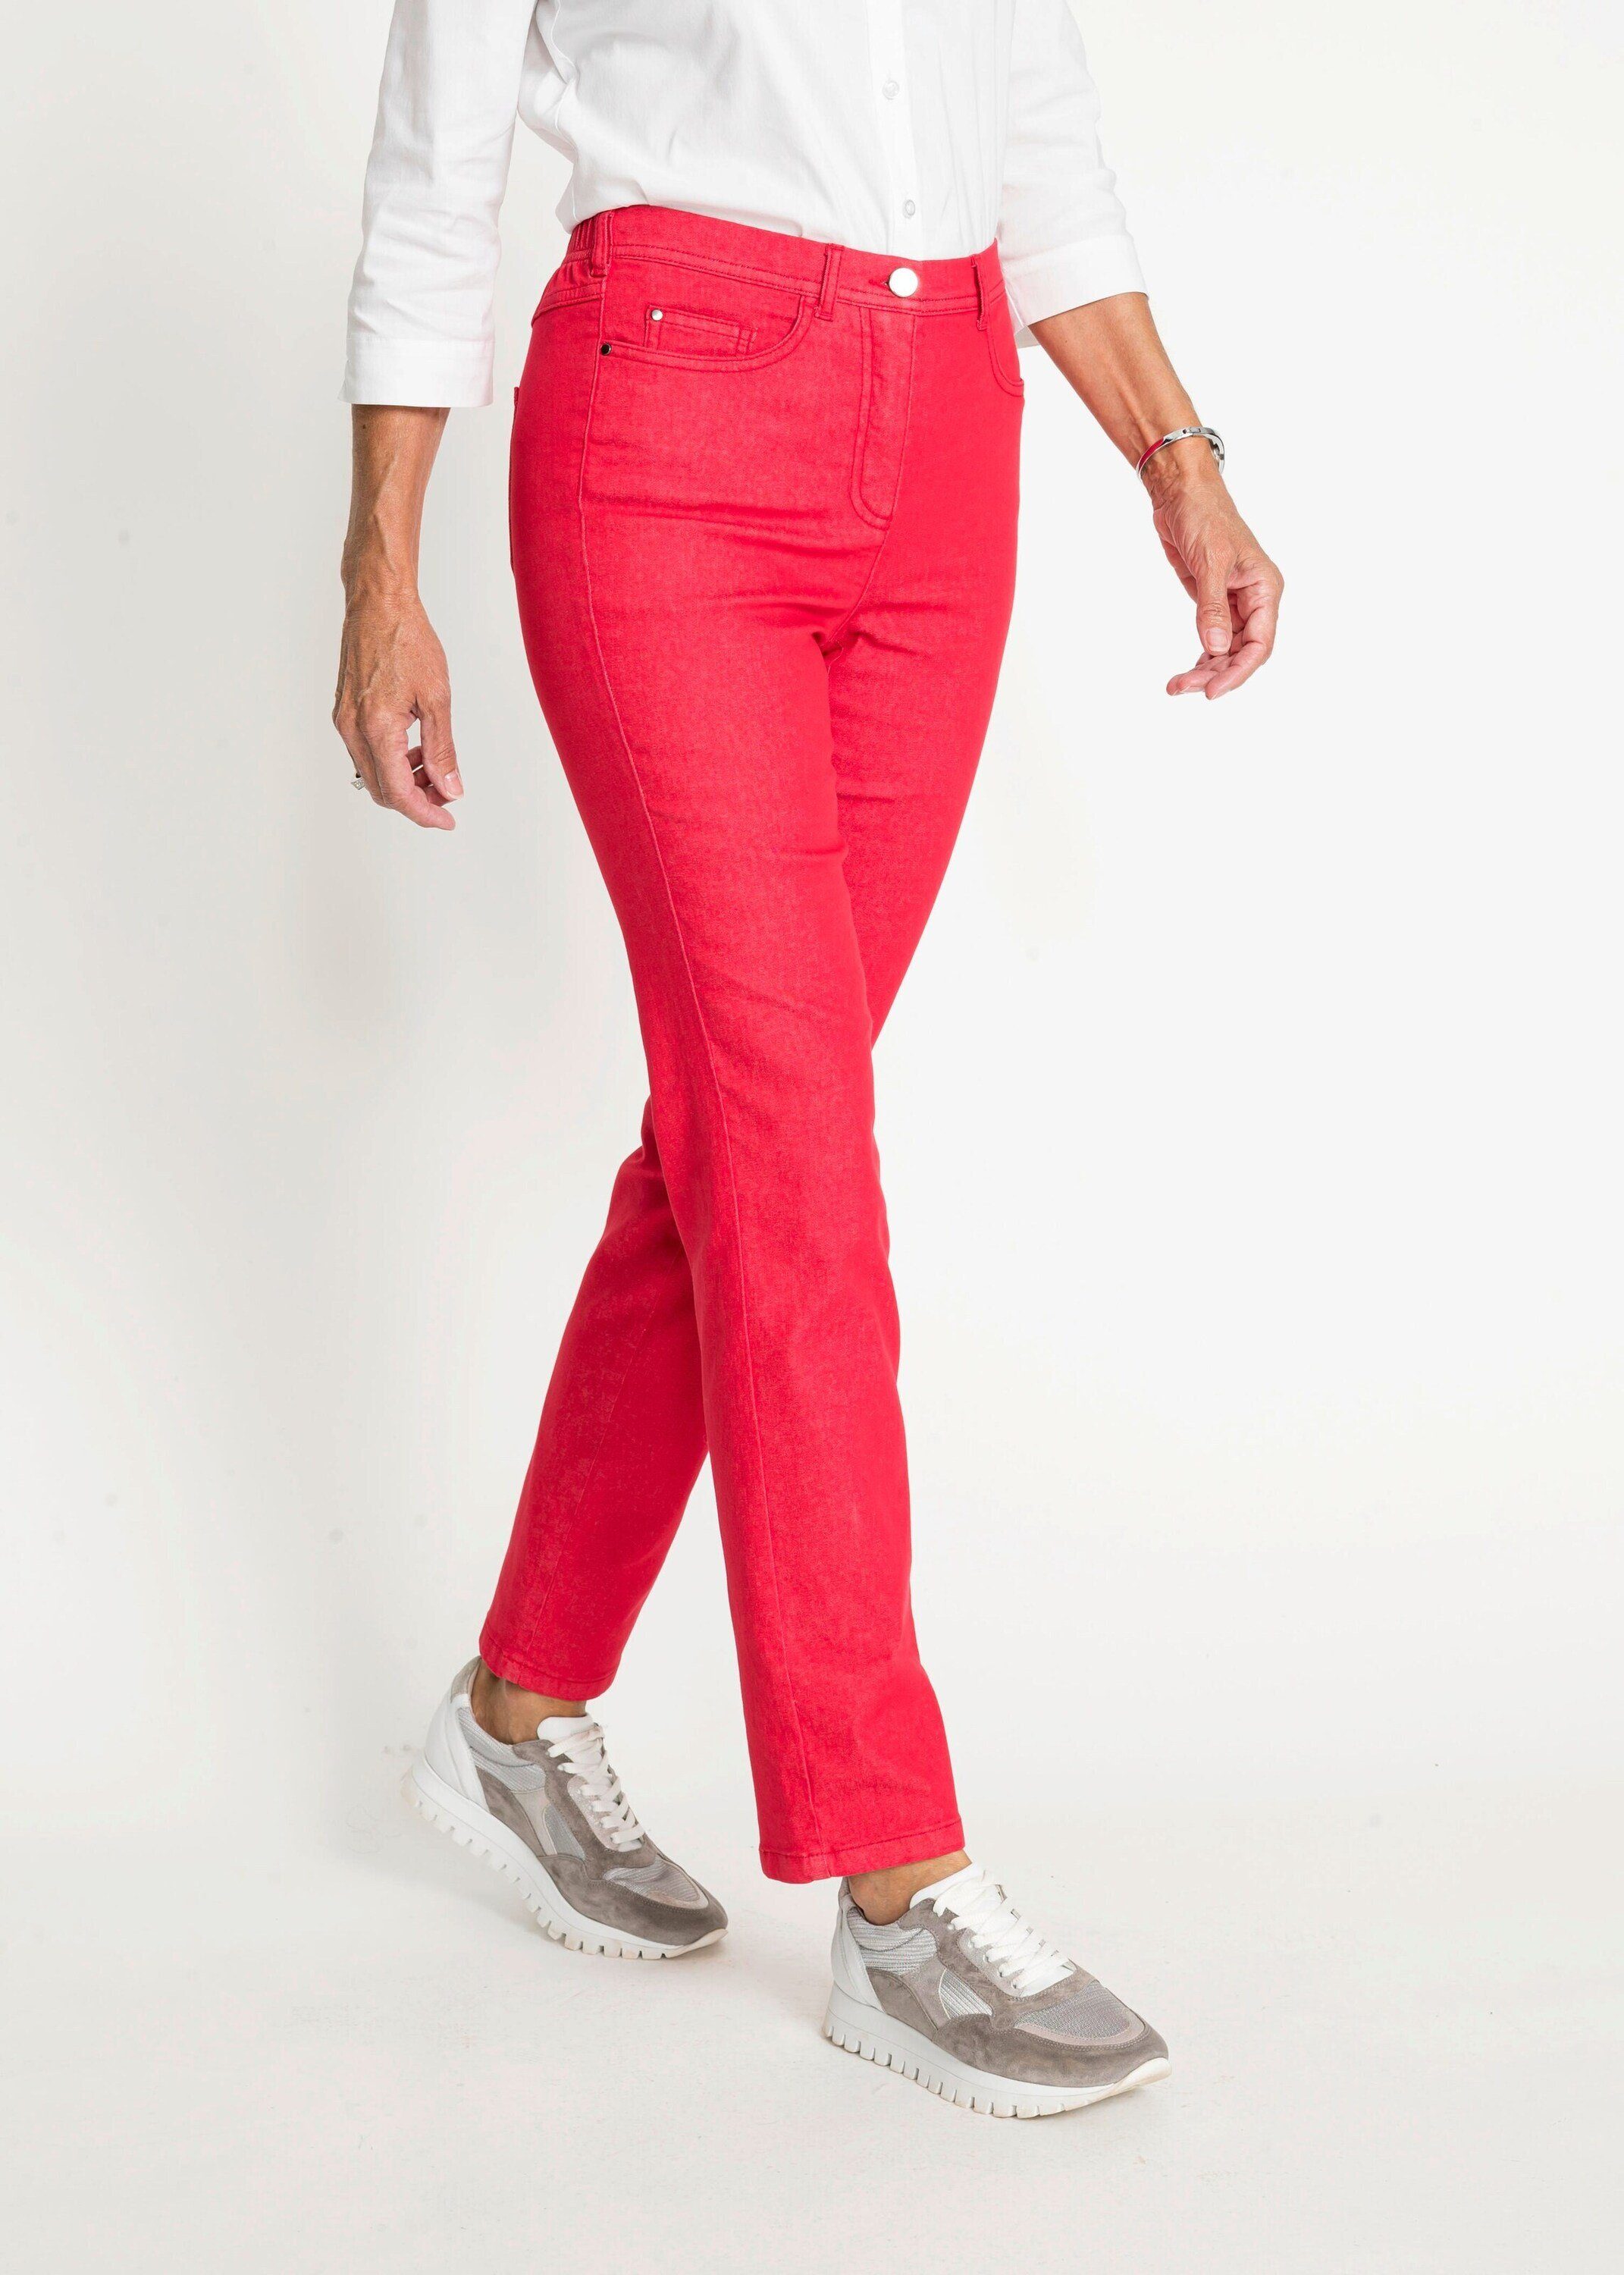 High-Stretch-Jeanshose Bequeme rot GOLDNER Jeans Bequeme